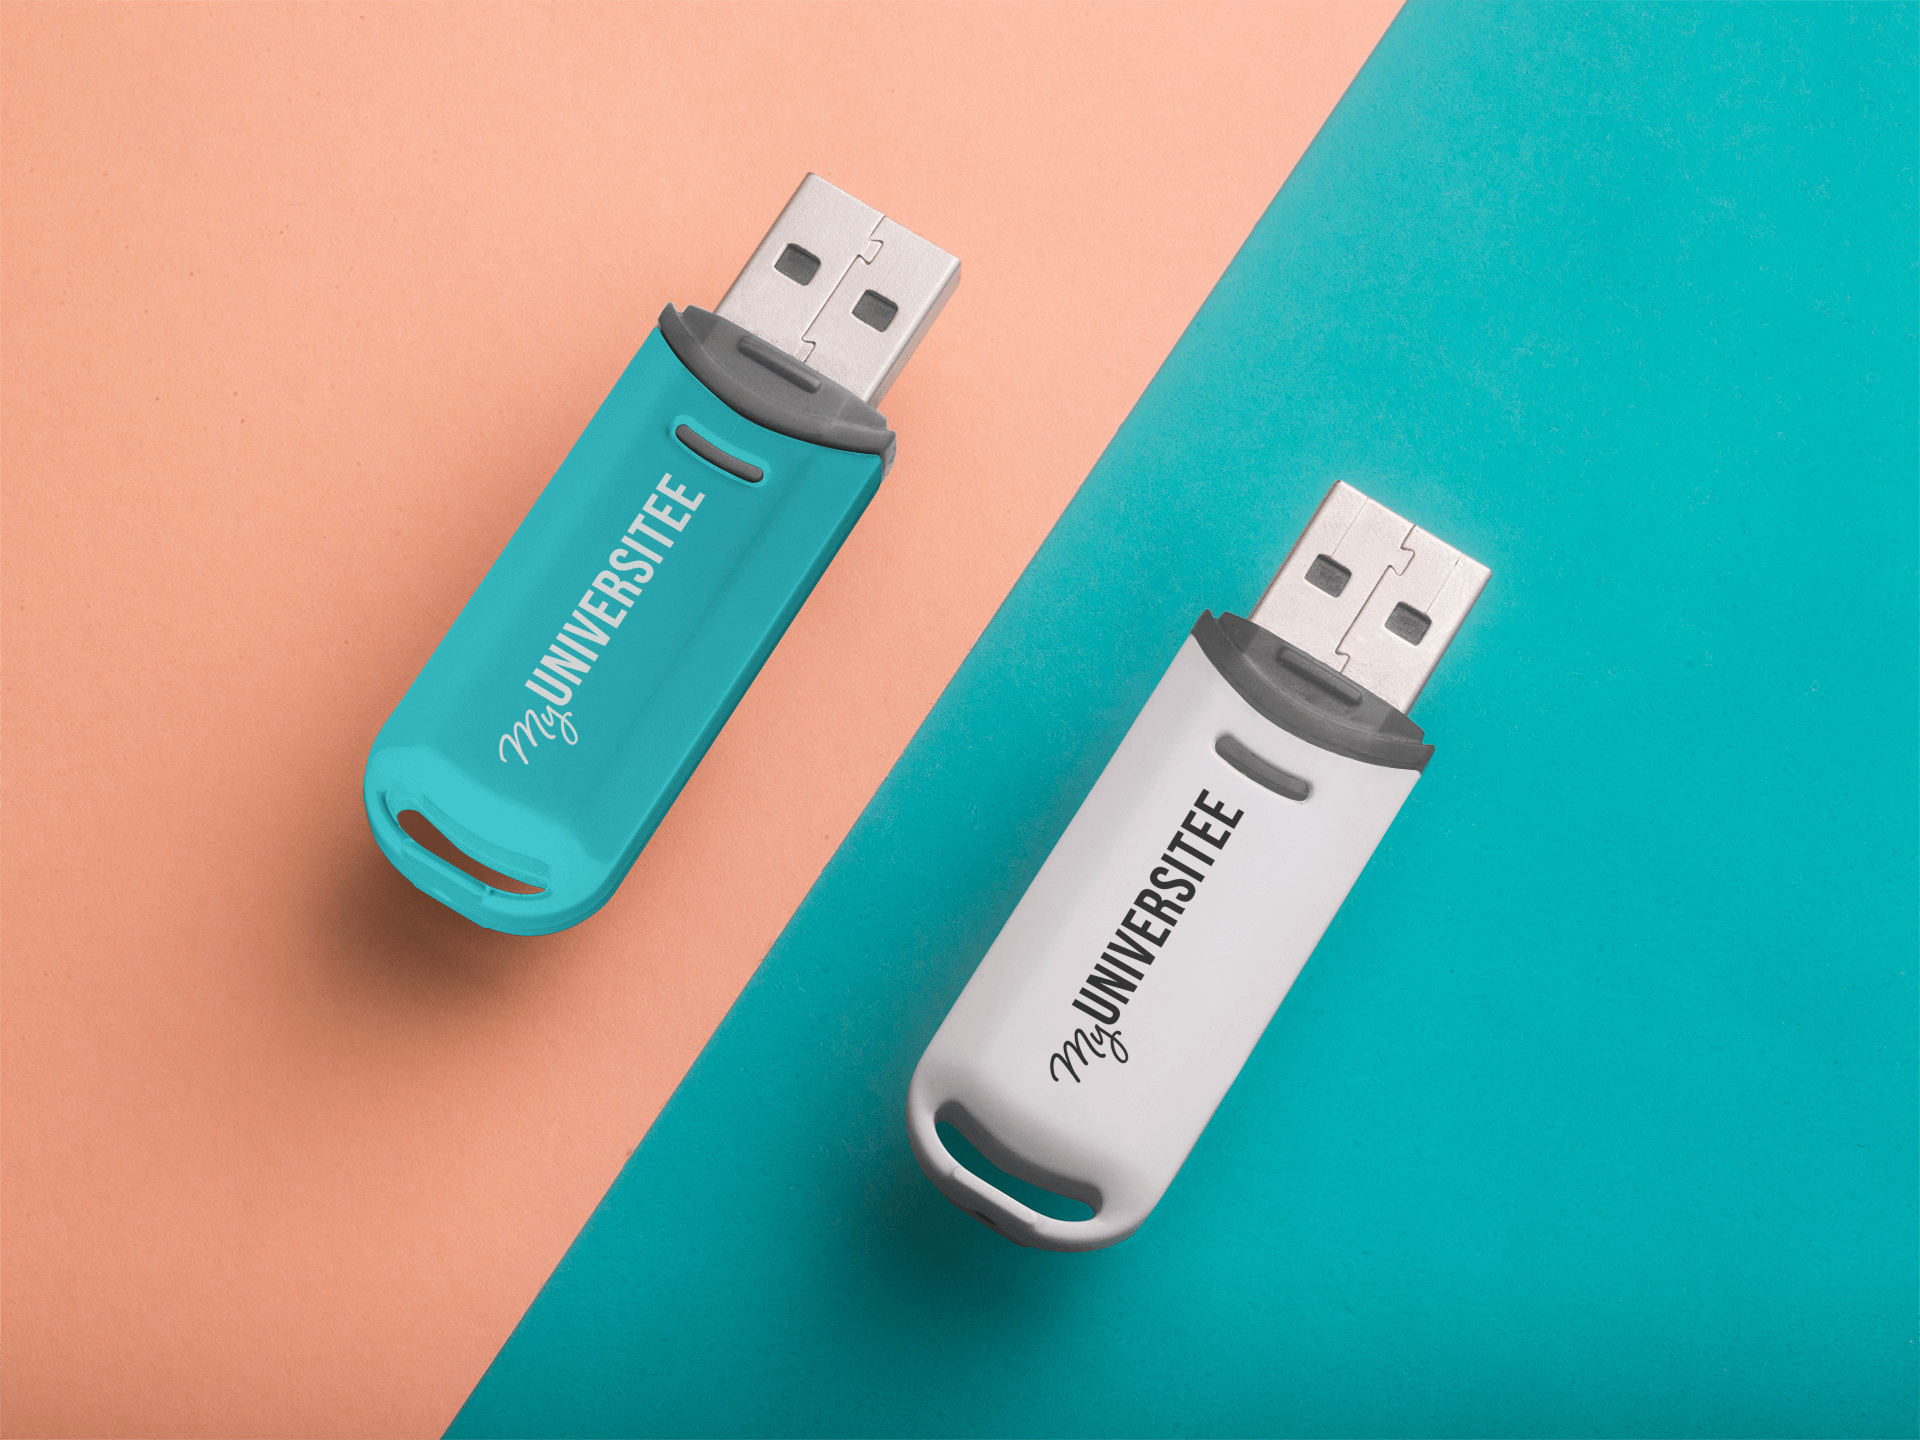 pair-of-usb-flash-drives-mockup-lying-on-turquoise-and-orange-surfaces-a6536